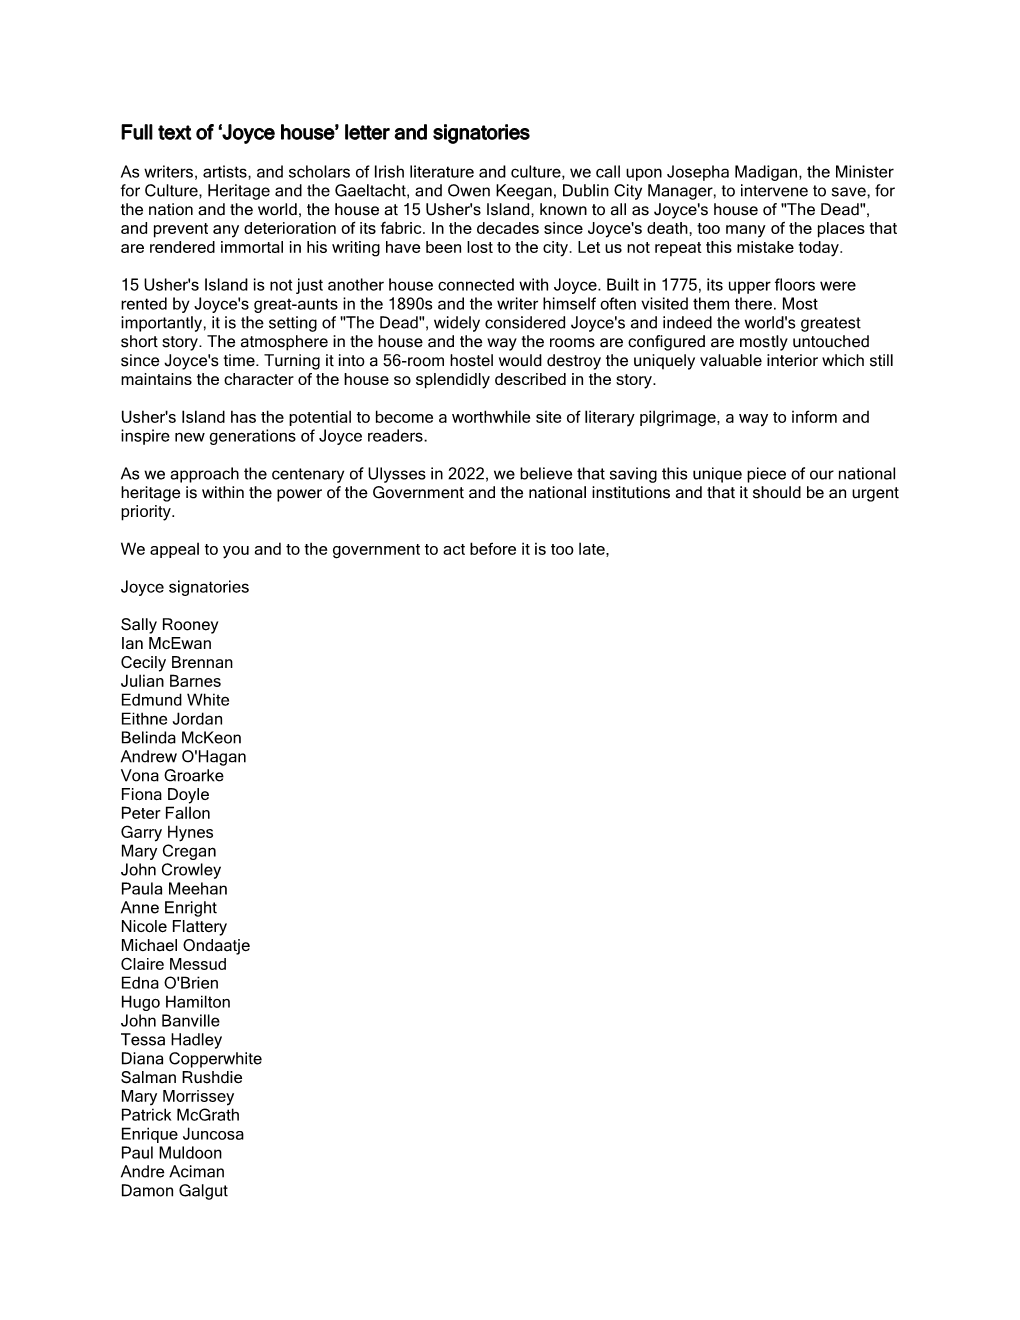 Full Text of 'Joyce House' Letter and Signatories